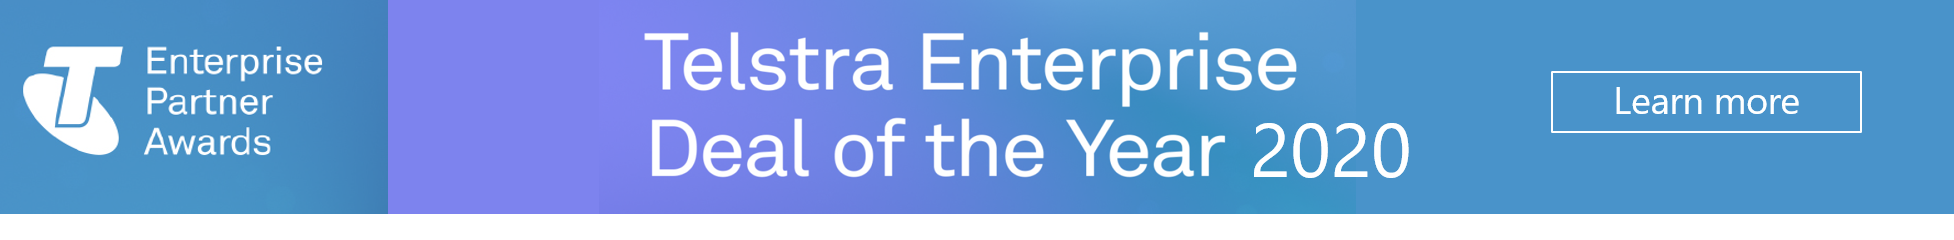 MobileCorp wins Telstra Enterprise Partner Deal of the Year 2020